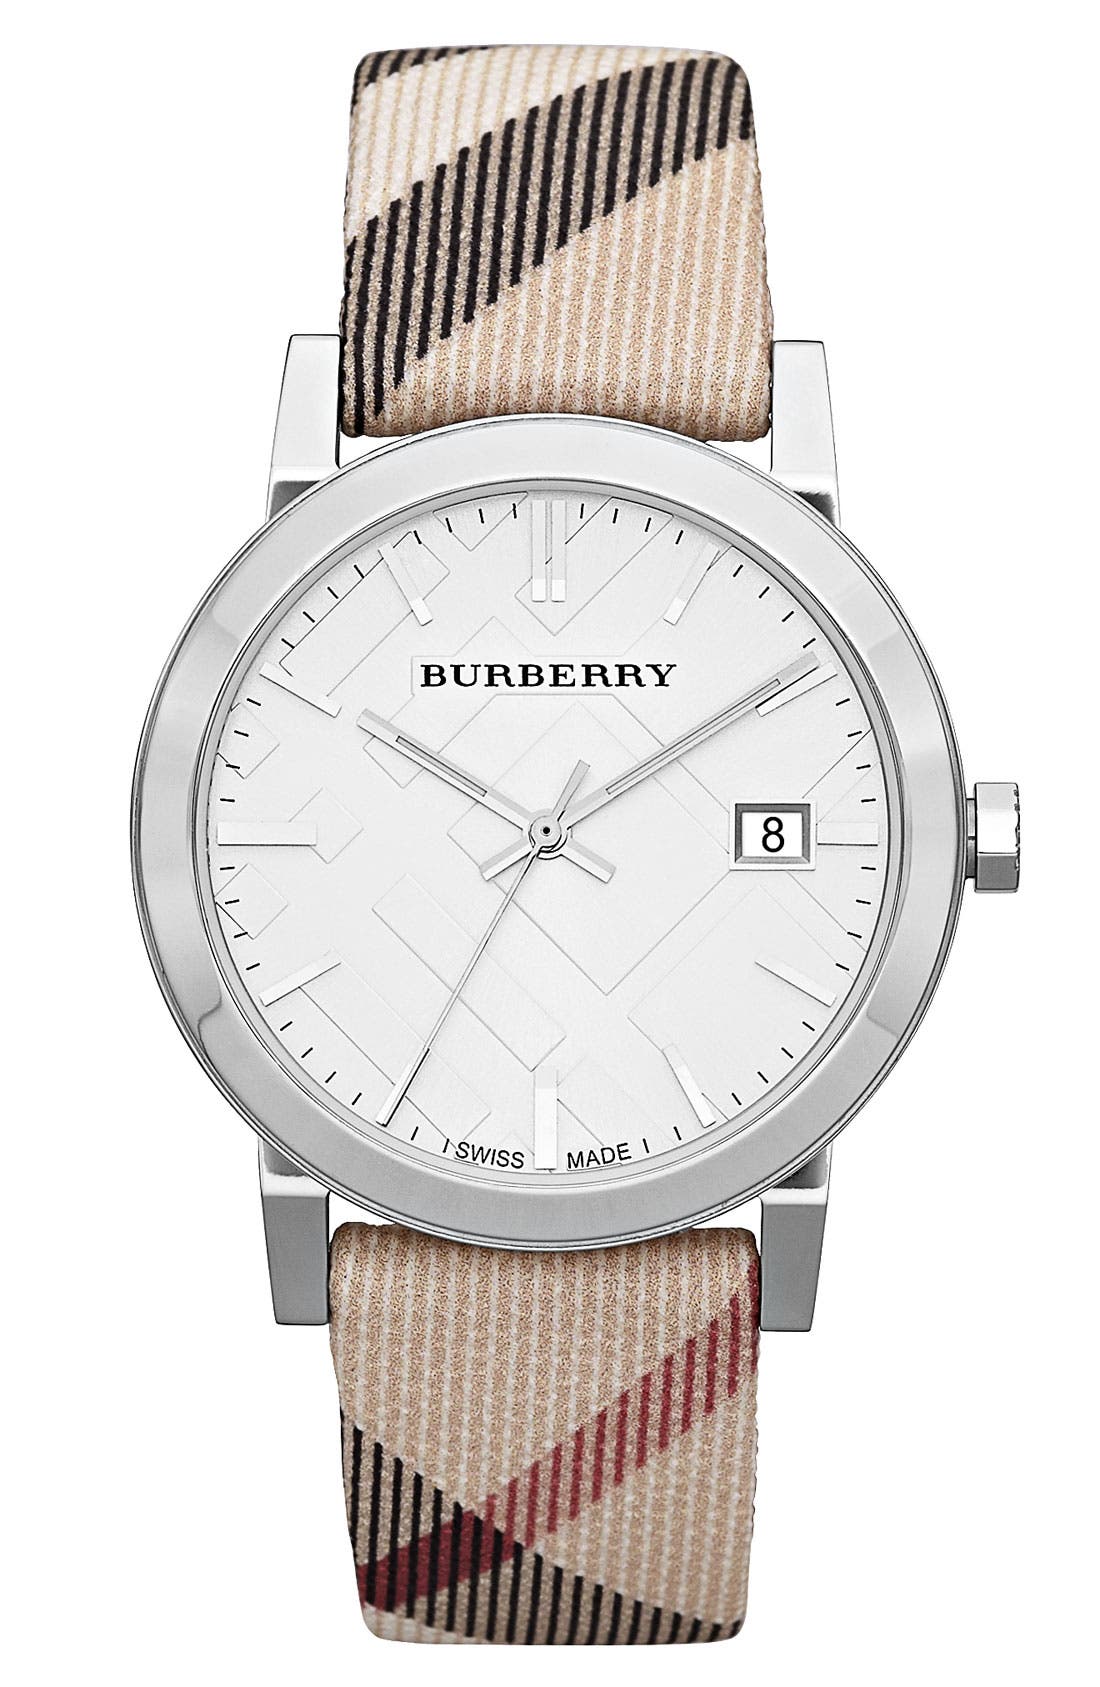 Burberry Watch Singapore Outlet | IUCN 